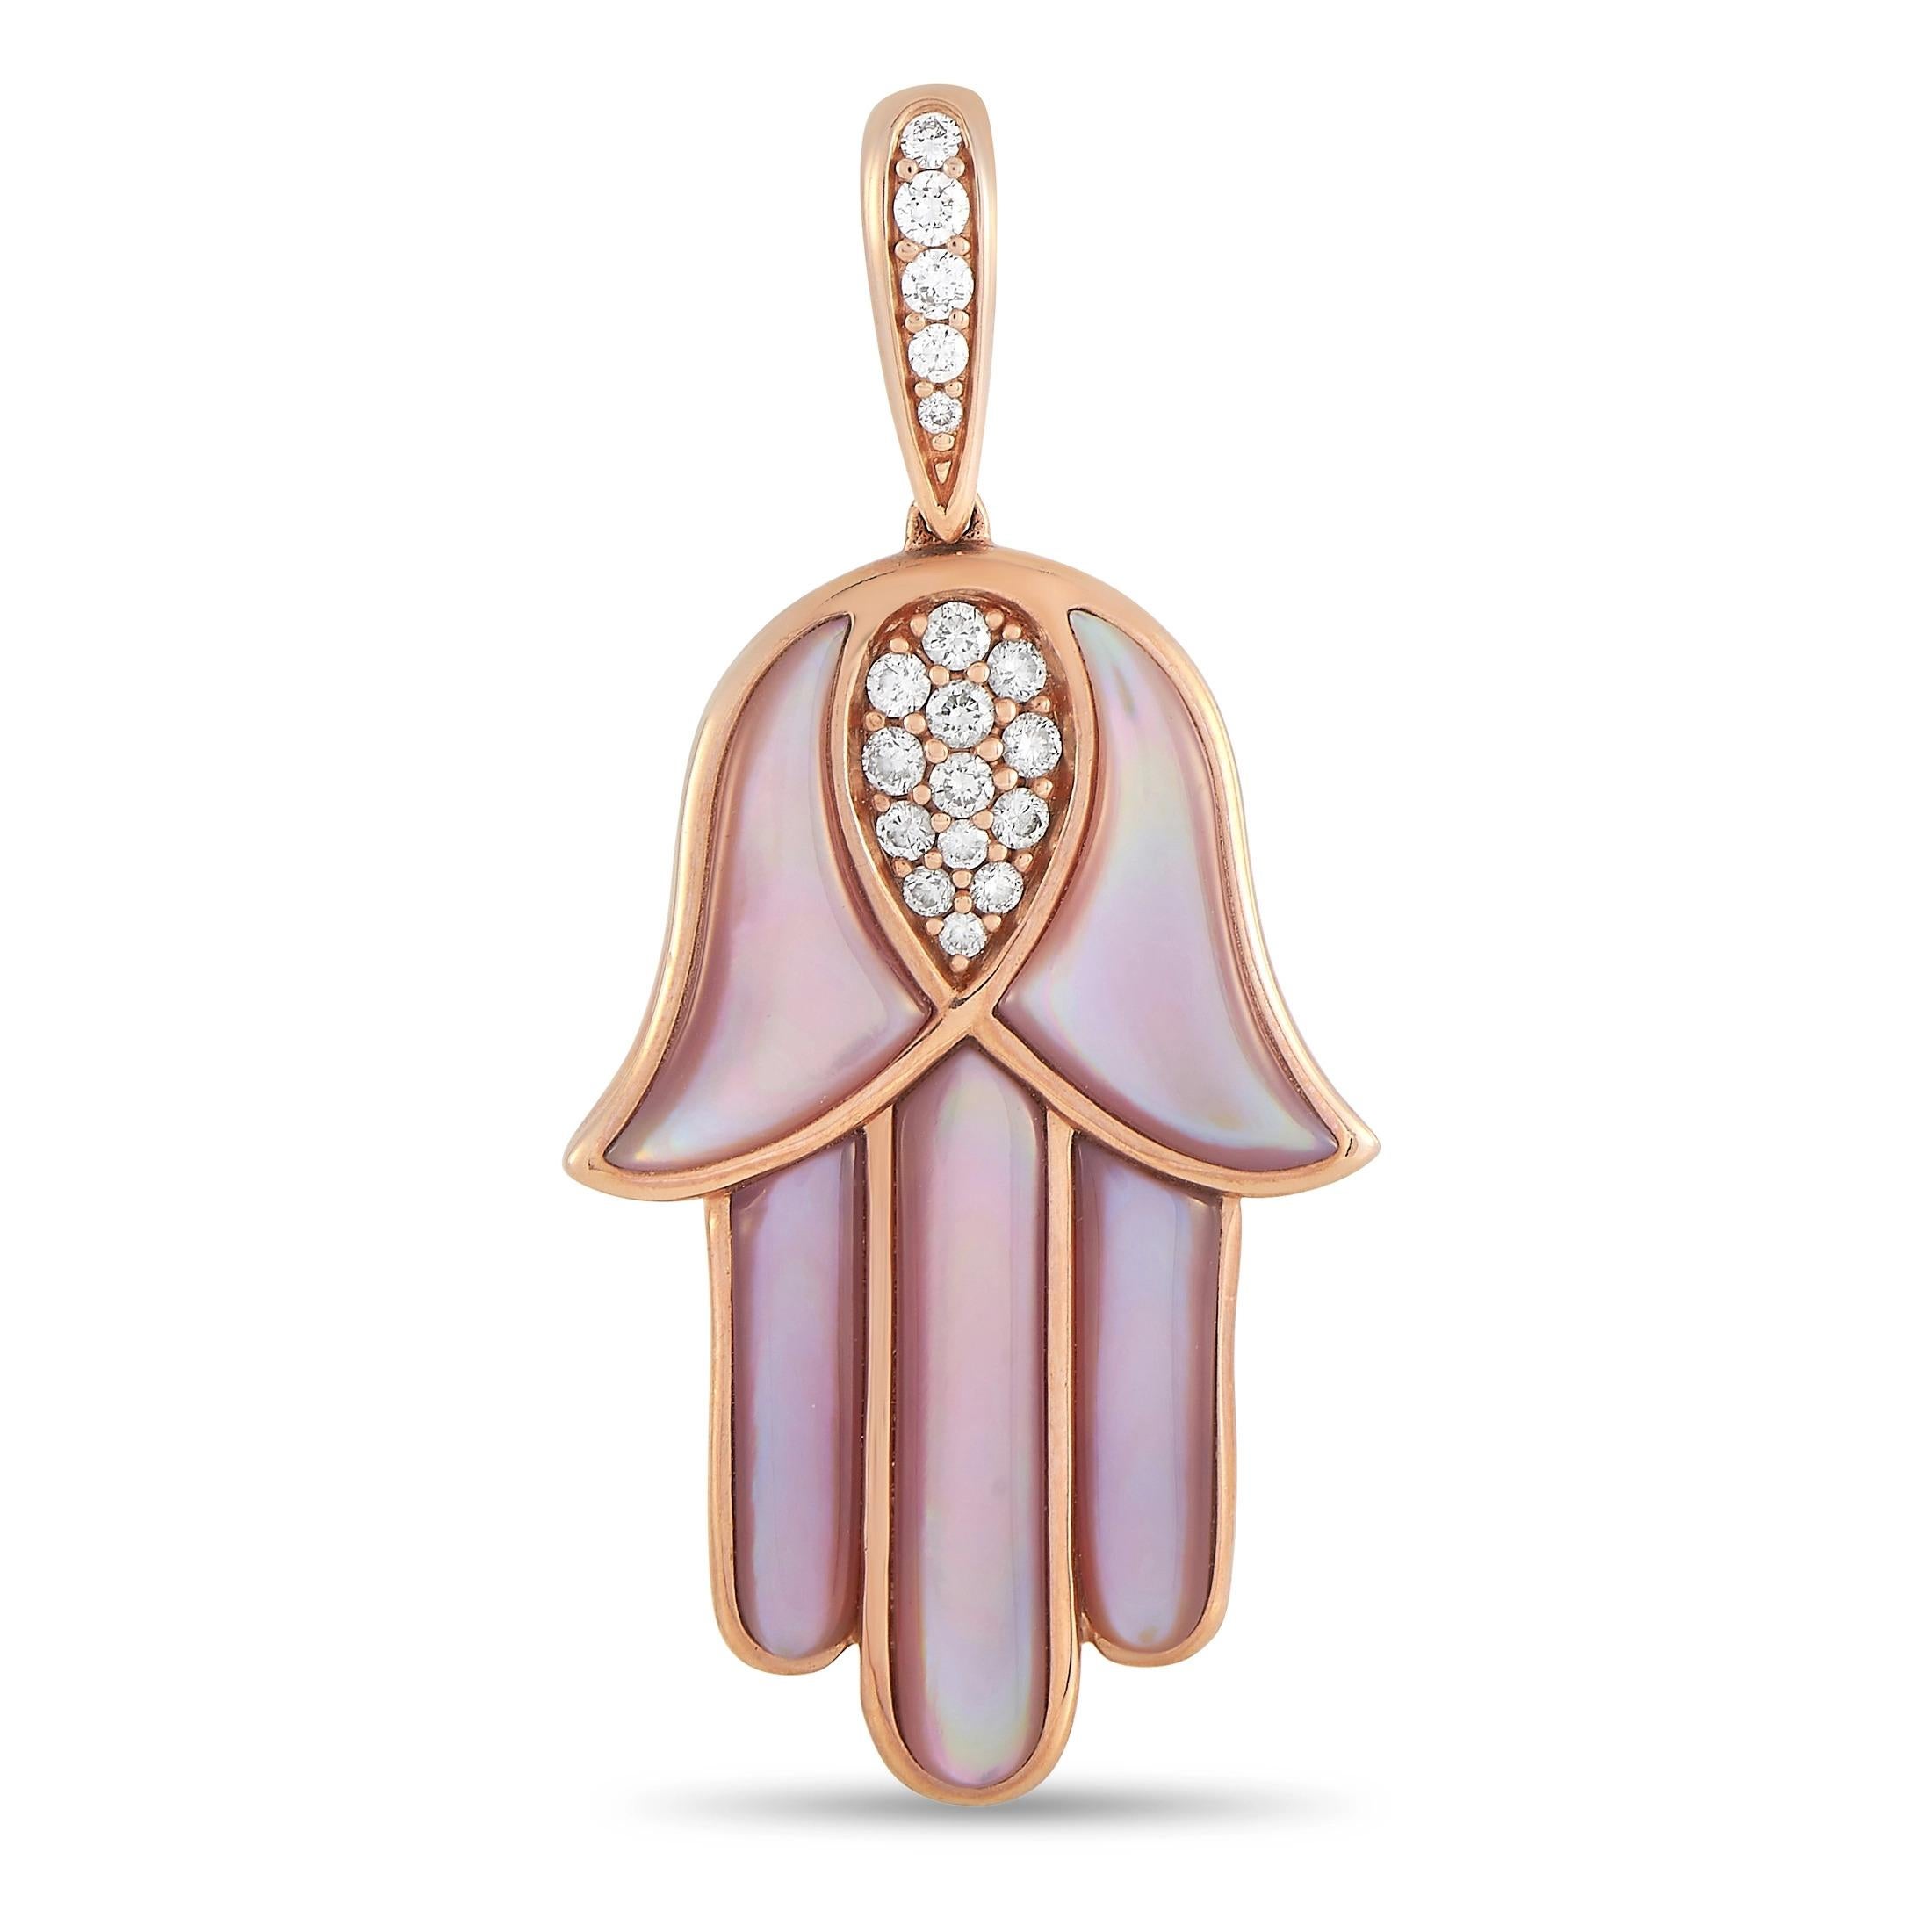 Kabana 14K Rose Gold 0.33 Ct Diamond and Mother of Pearl Hamsa Pendant In New Condition For Sale In Southampton, PA